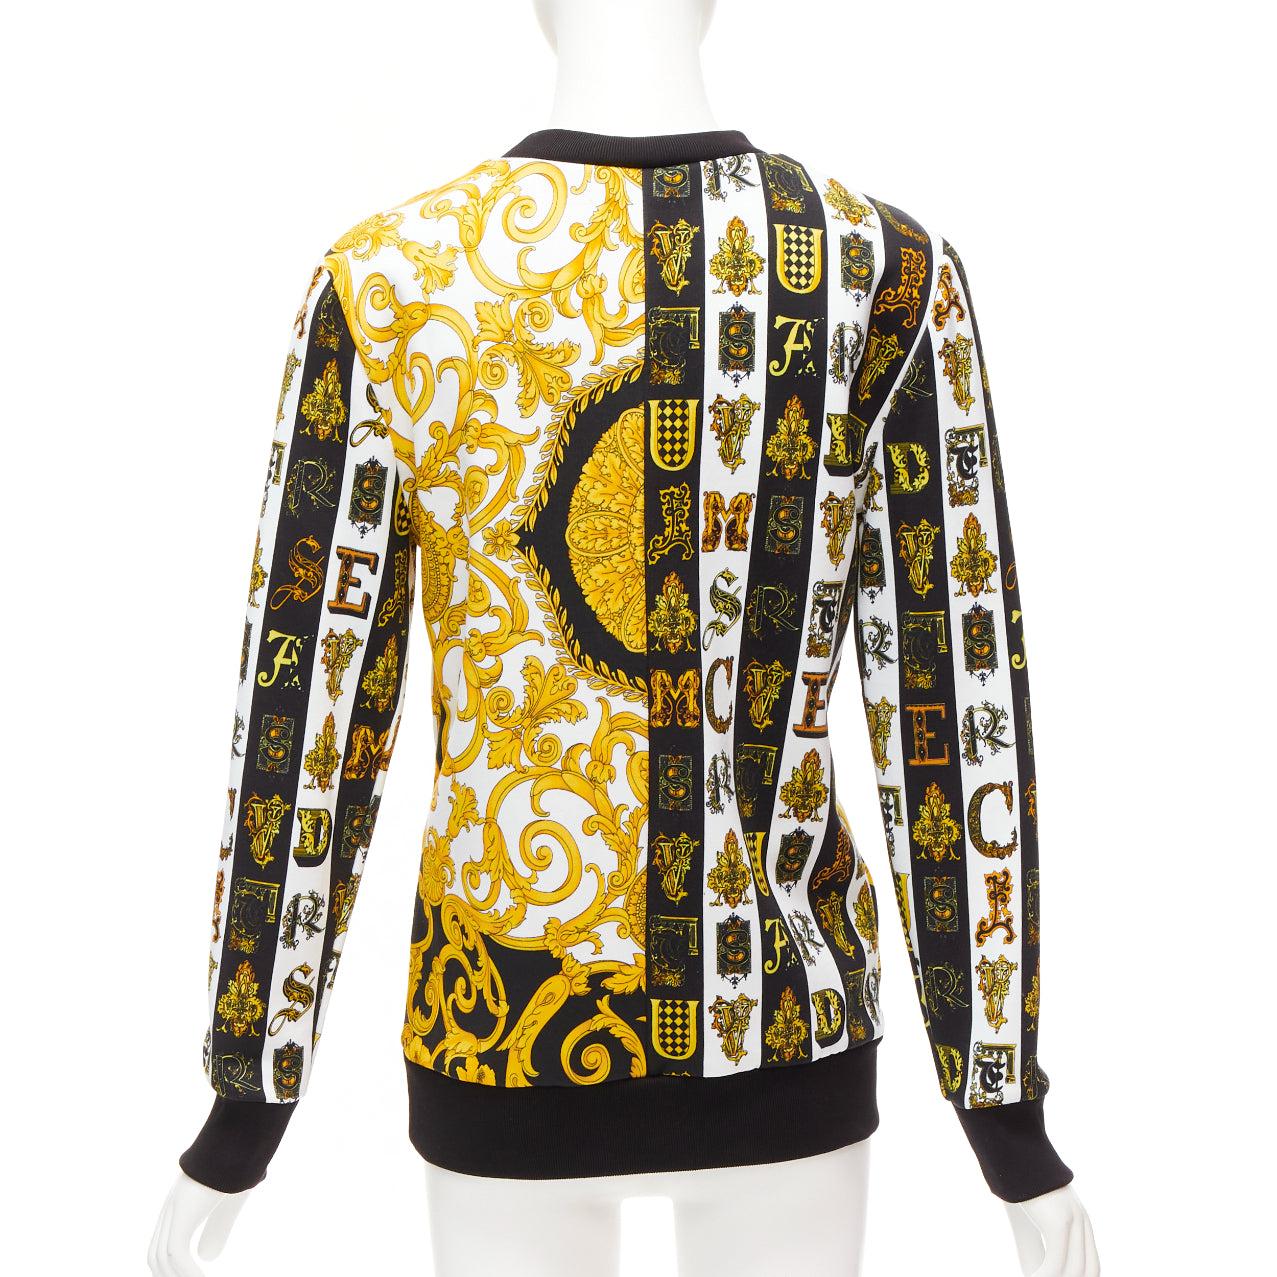 VERSACE mixed archive Barocco print cotton crew neck sweater IT36 XXS
Reference: AAWC/A00636
Brand: Versace
Designer: Donatella Versace
Material: Cotton
Color: Gold, Black
Pattern: Barocco
Extra Details: Mixed Versace vintage archive print.
Made in: